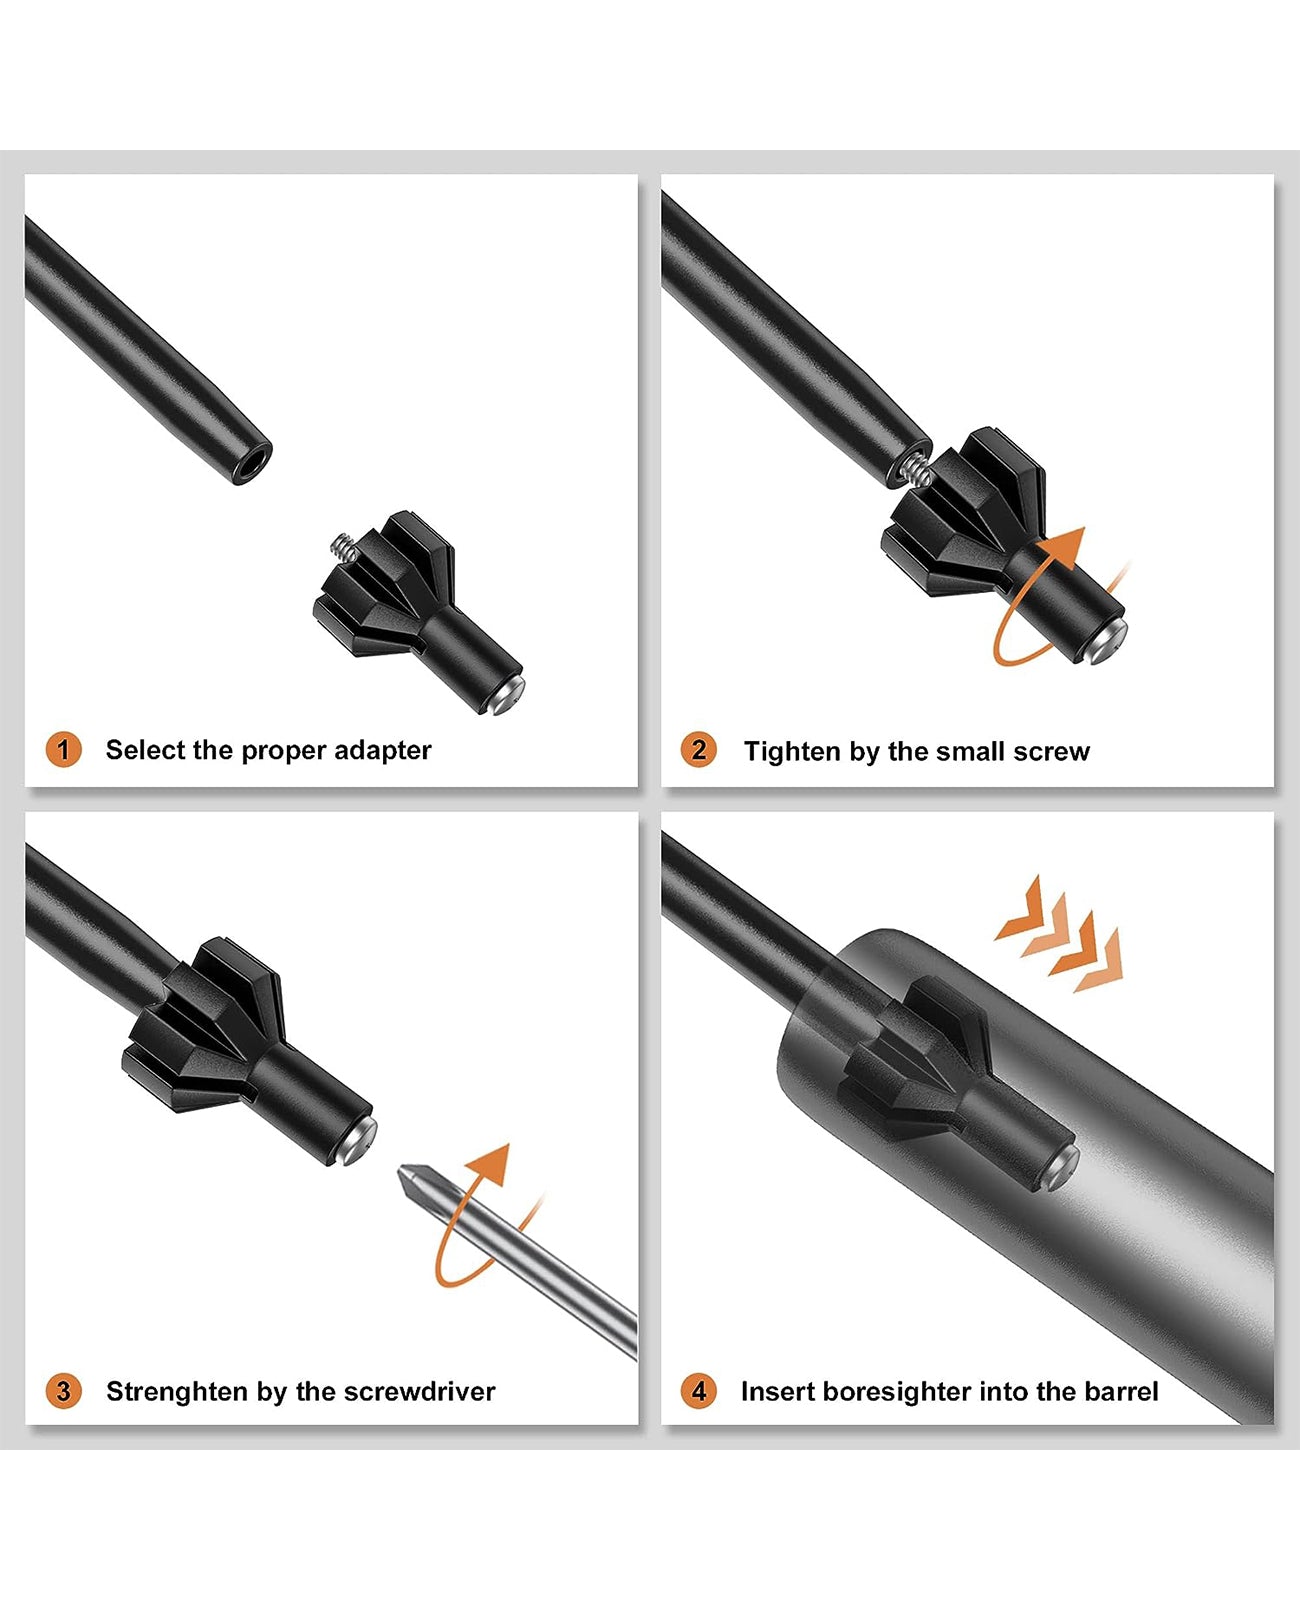 How to install the laser bore sight kit